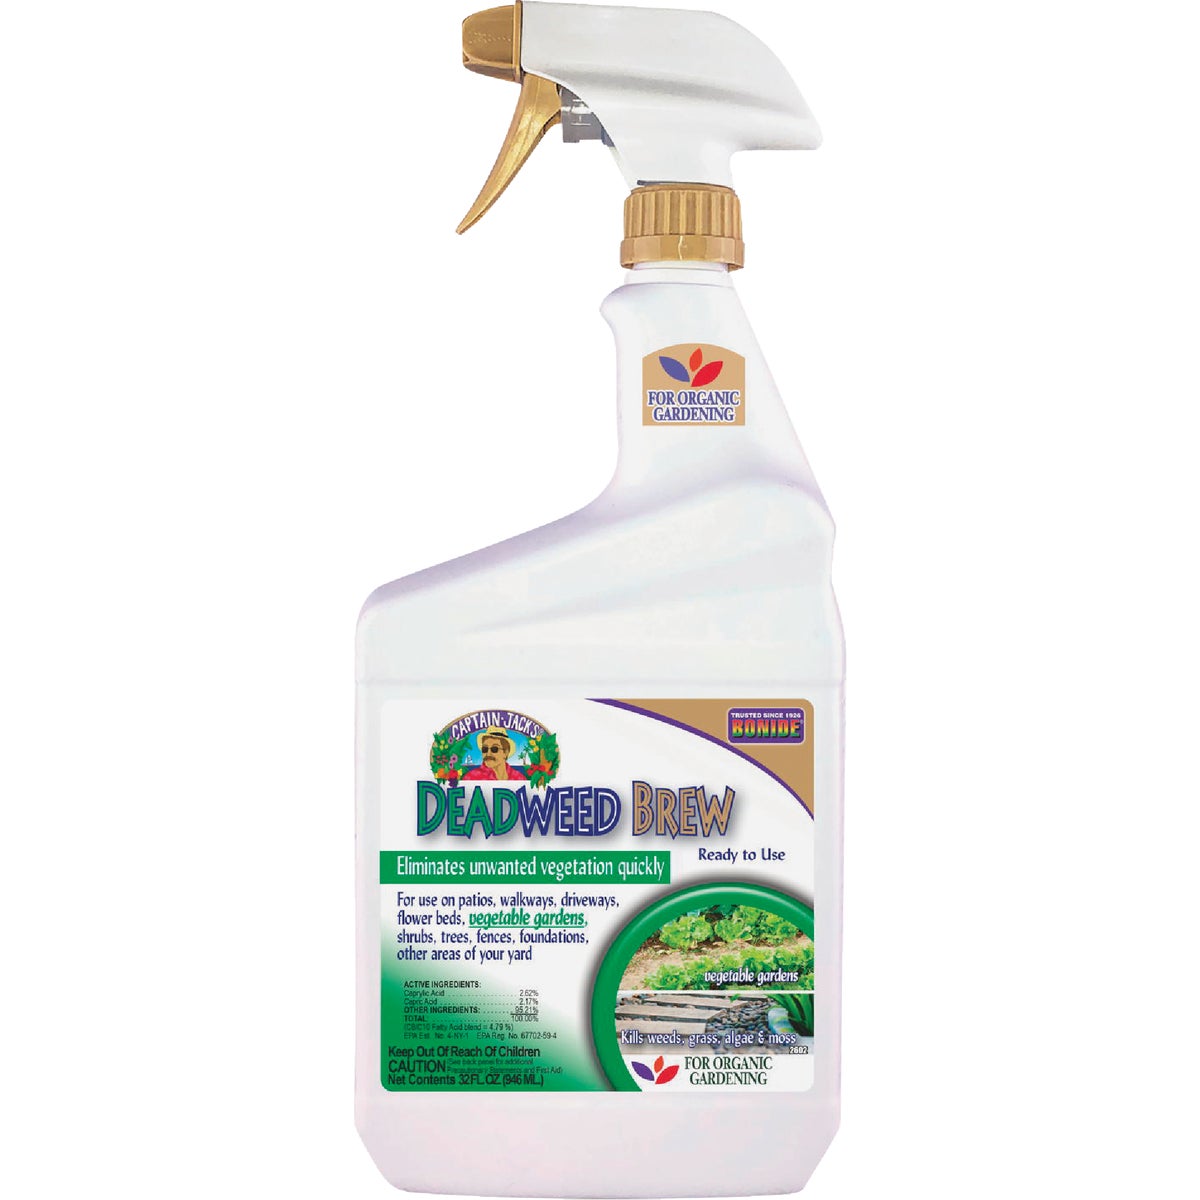 Item 704803, Effective herbicide that provides fast-acting control of weeds, grass, 